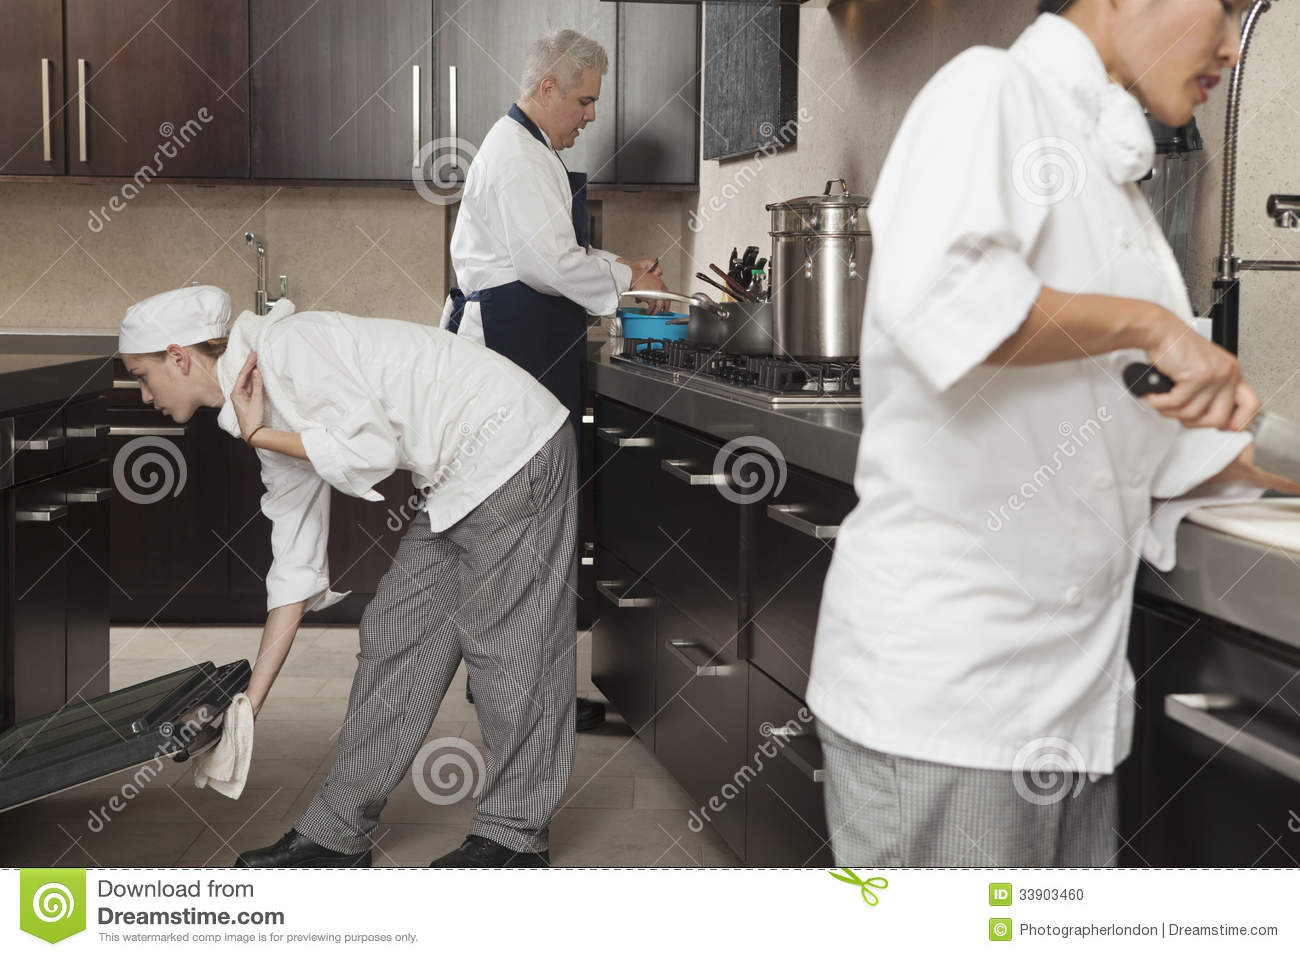 Chefs Working Together In Commercial Kitchen Stock Photo   Image    